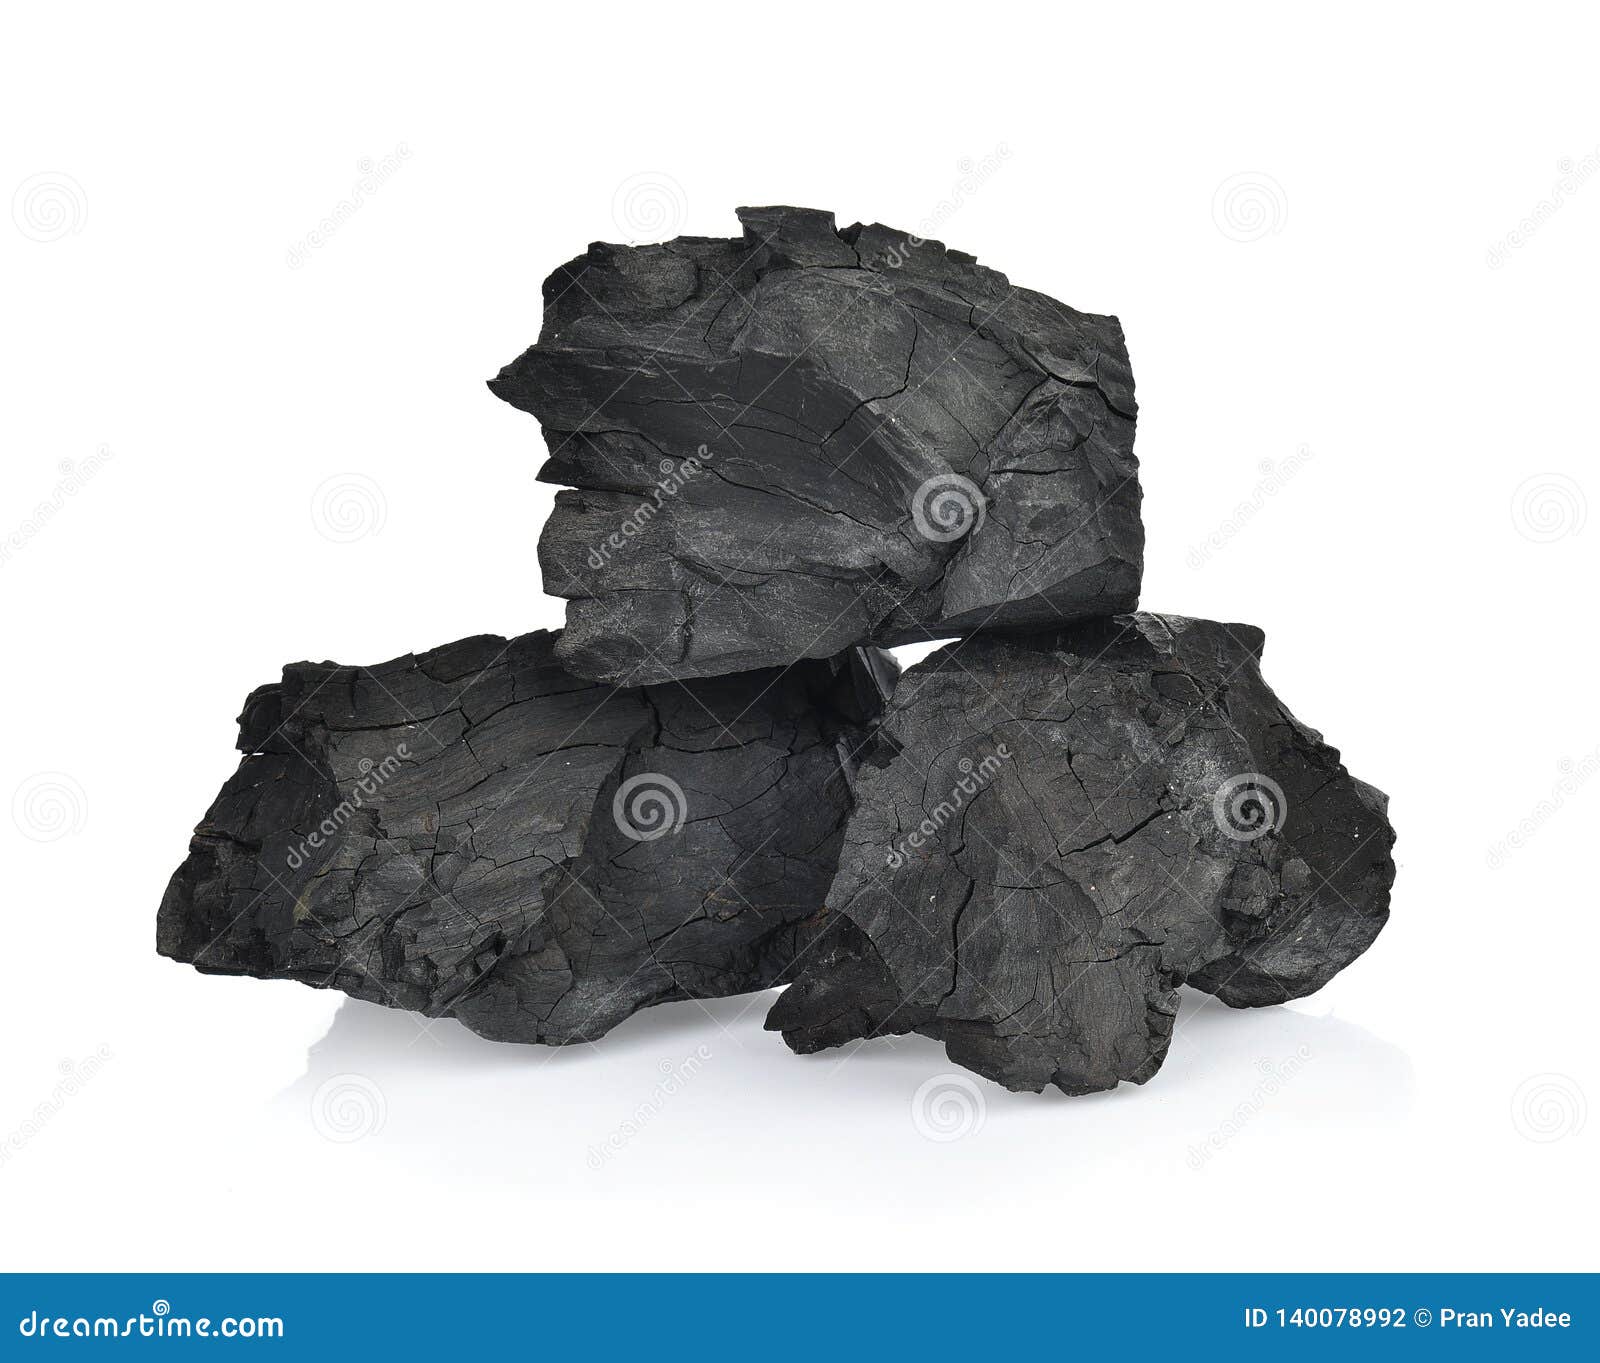 Steam coal is used for фото 102